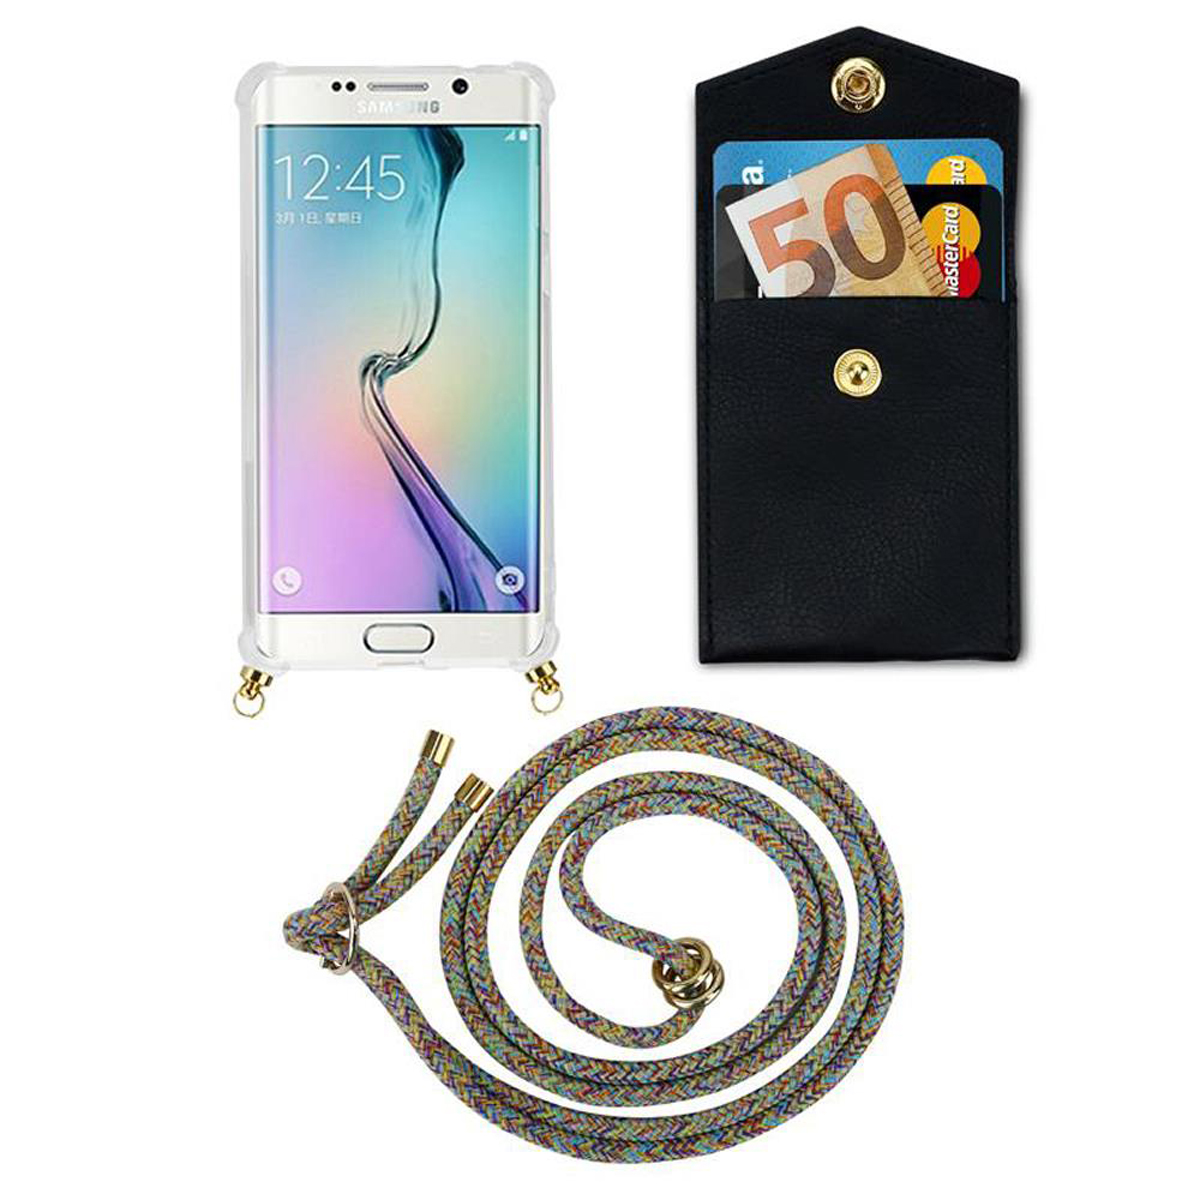 CADORABO Handy Kette mit Gold S6, abnehmbarer Band und Backcover, Kordel Hülle, Ringen, Galaxy RAINBOW Samsung